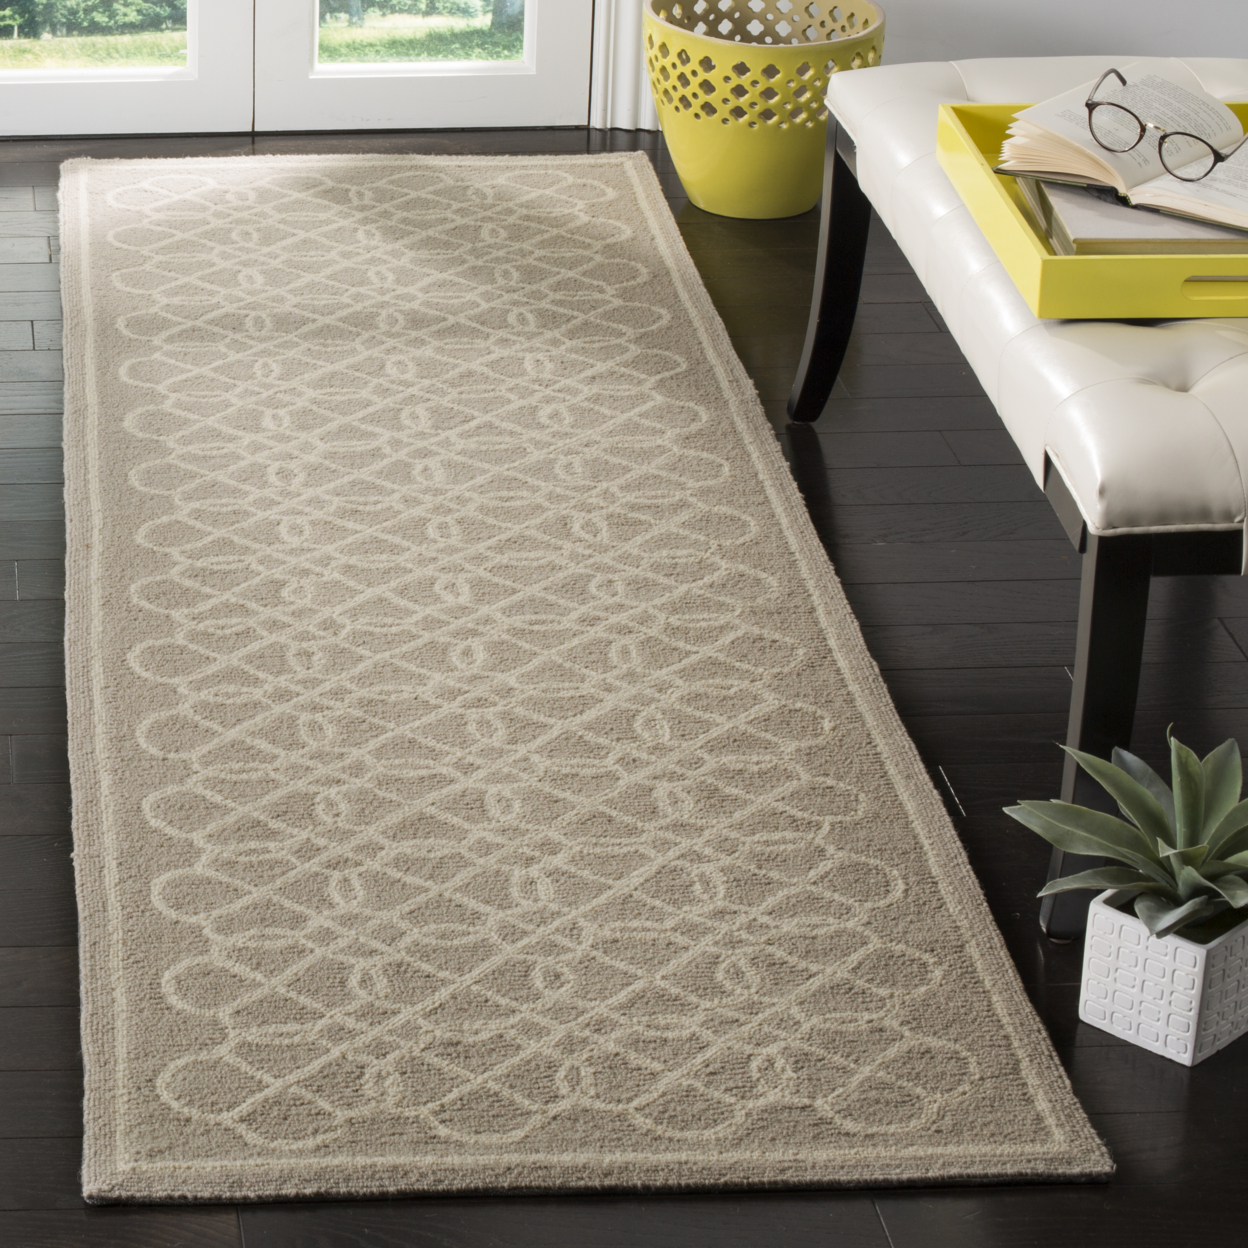 SAFAVIEH Chelsea HK739A Hand-hooked Tan / Ivory Rug - 6' Square